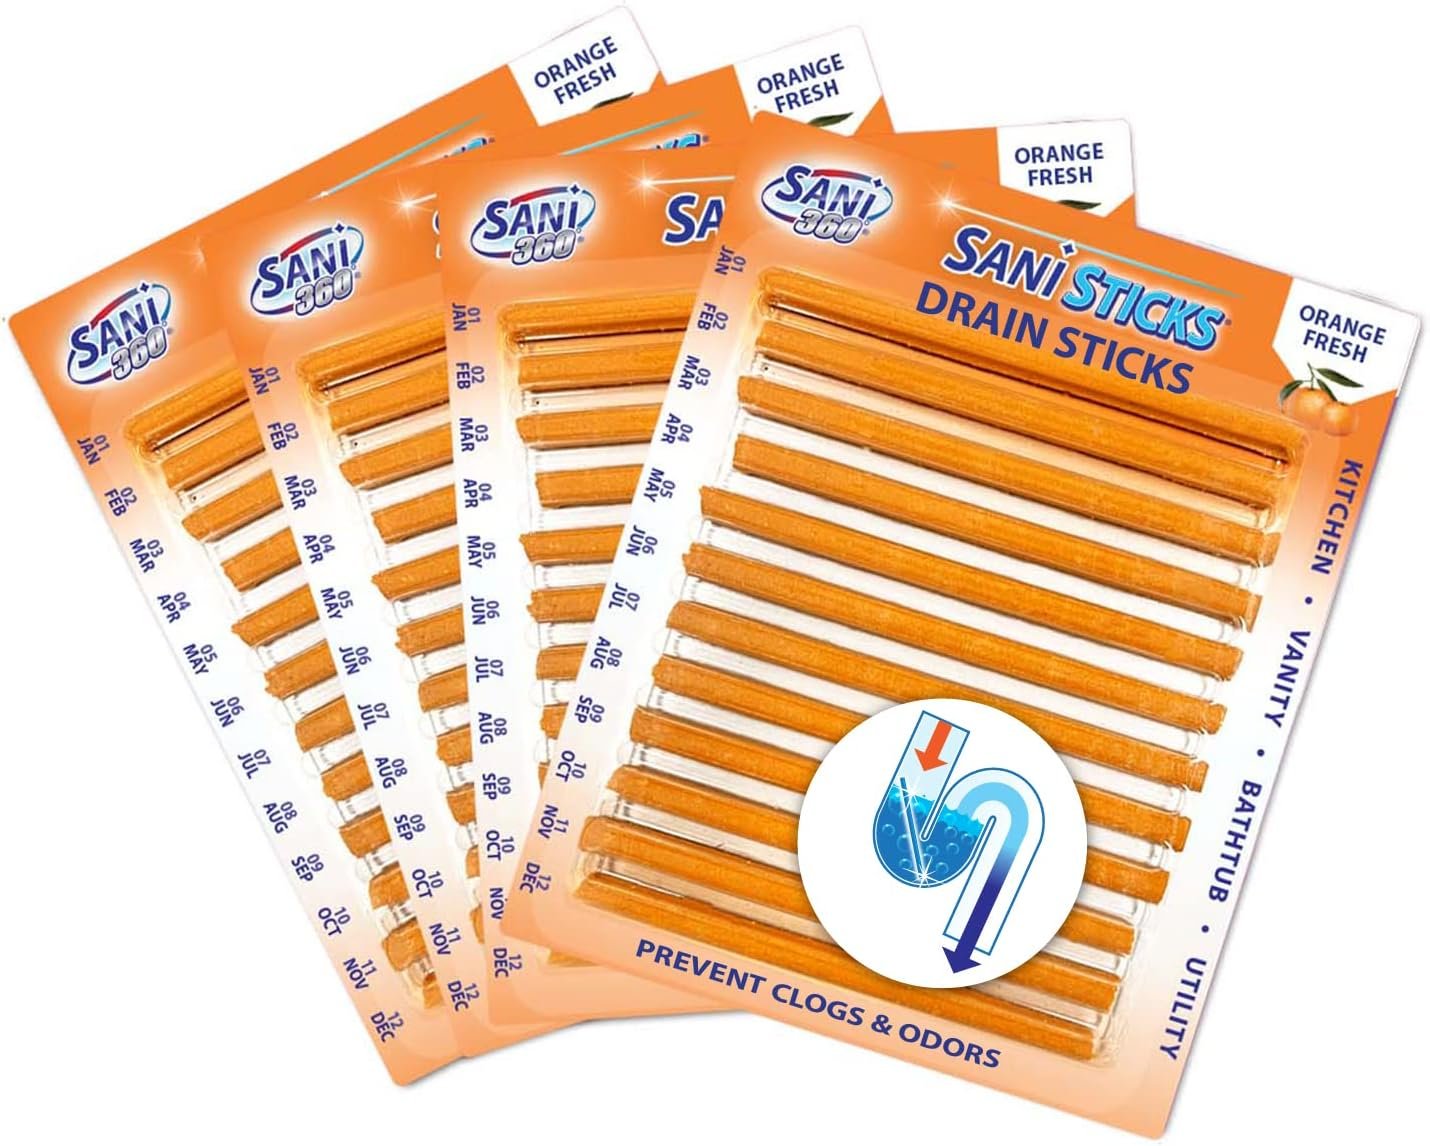 SANI 360° Sani Sticks Drain Cleaner and Deodorizer, Enzyme Pipe Cleaners, Eliminate Odors, Prevent Clogged Drains, Safe for Sinks, Bathtub Drains, Septic Tanks, 48 Count, Orange Scent